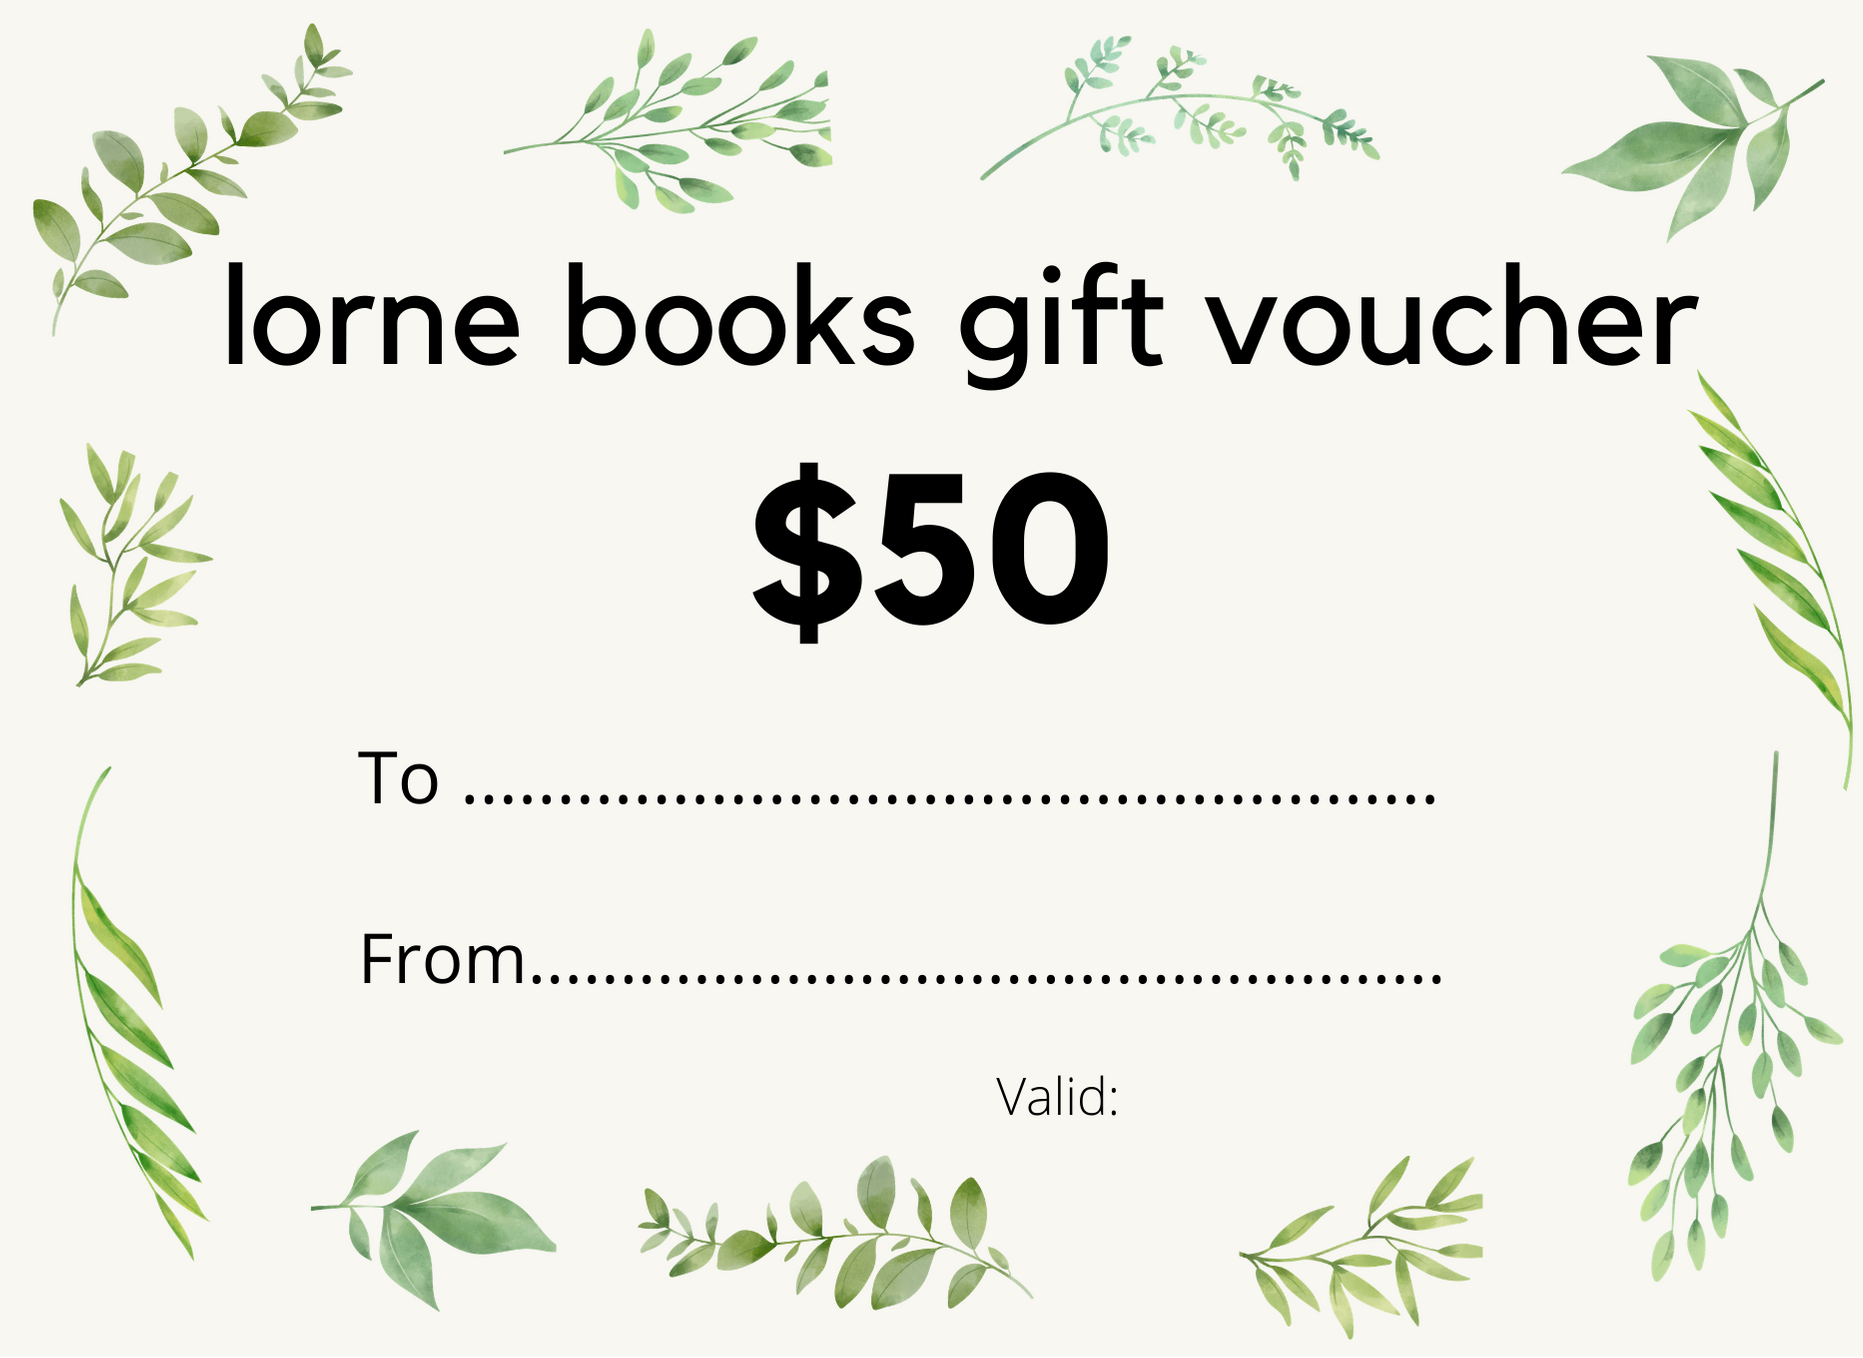 lorne books gift voucher $50.png